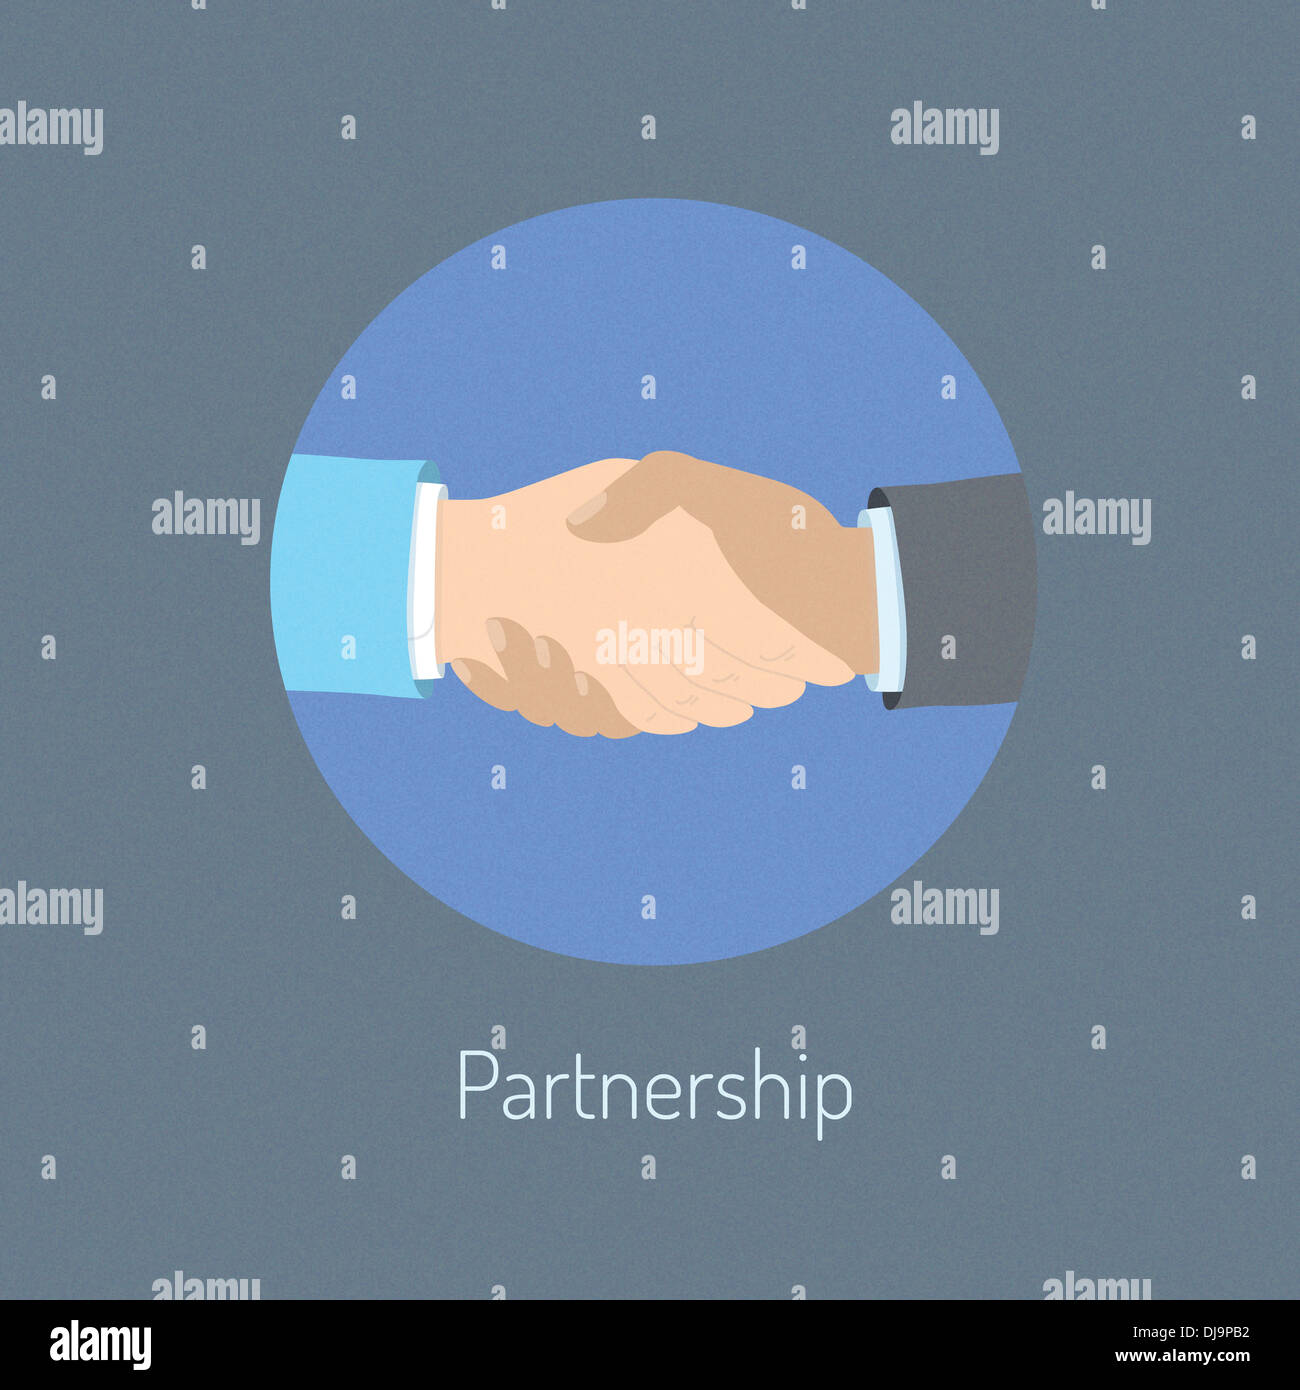 Illustration concept of two business people hand shaking which symbolizing partnership cooperation and success deal negotiation Stock Photo